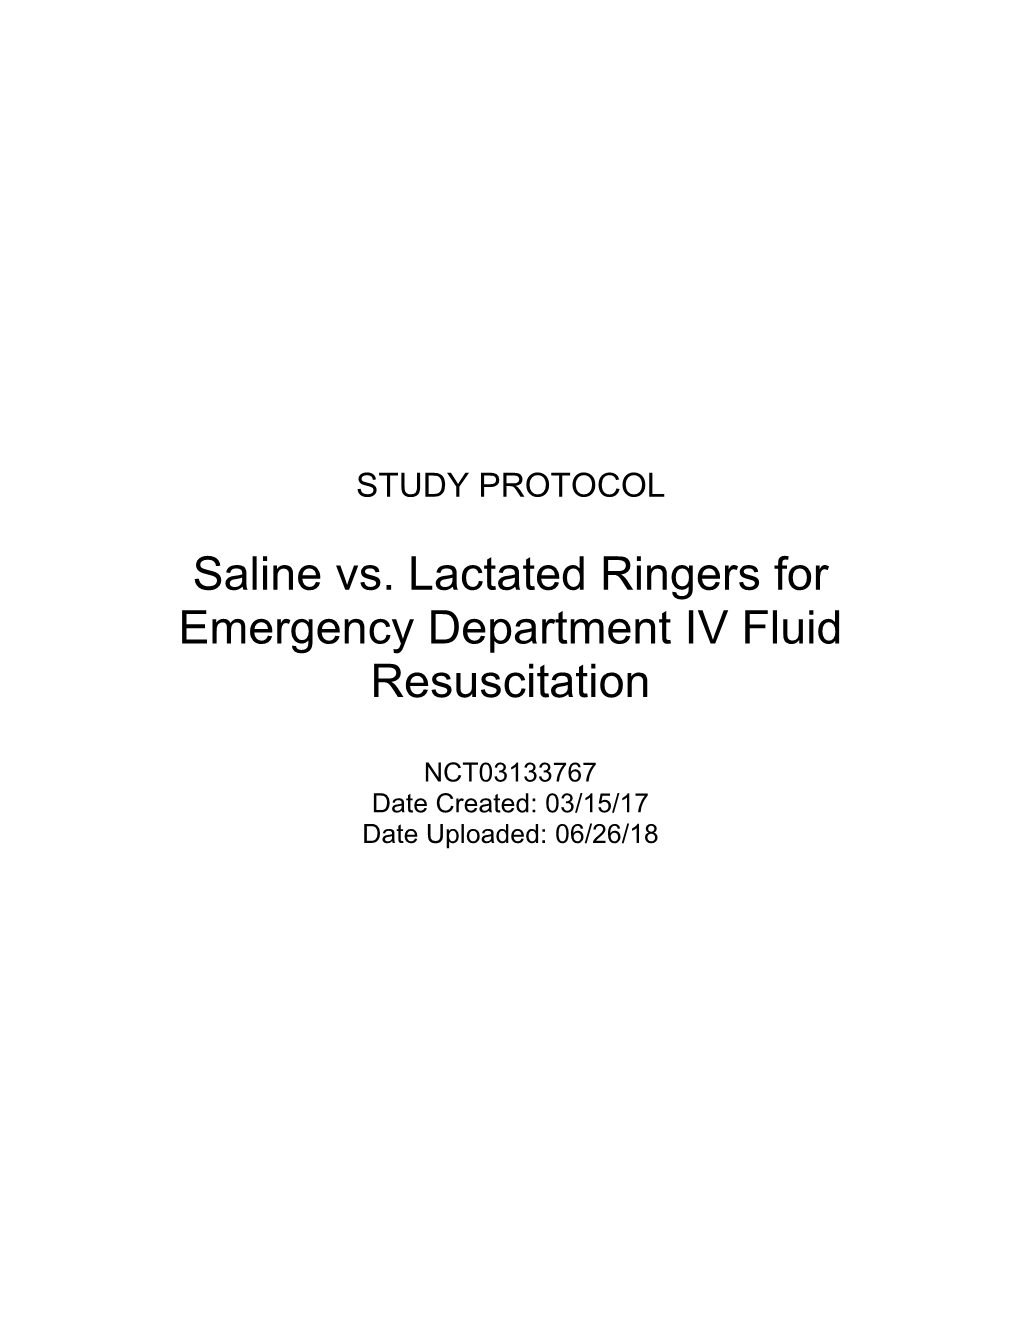 Saline Vs. Lactated Ringers for Emergency Department IV Fluid ...